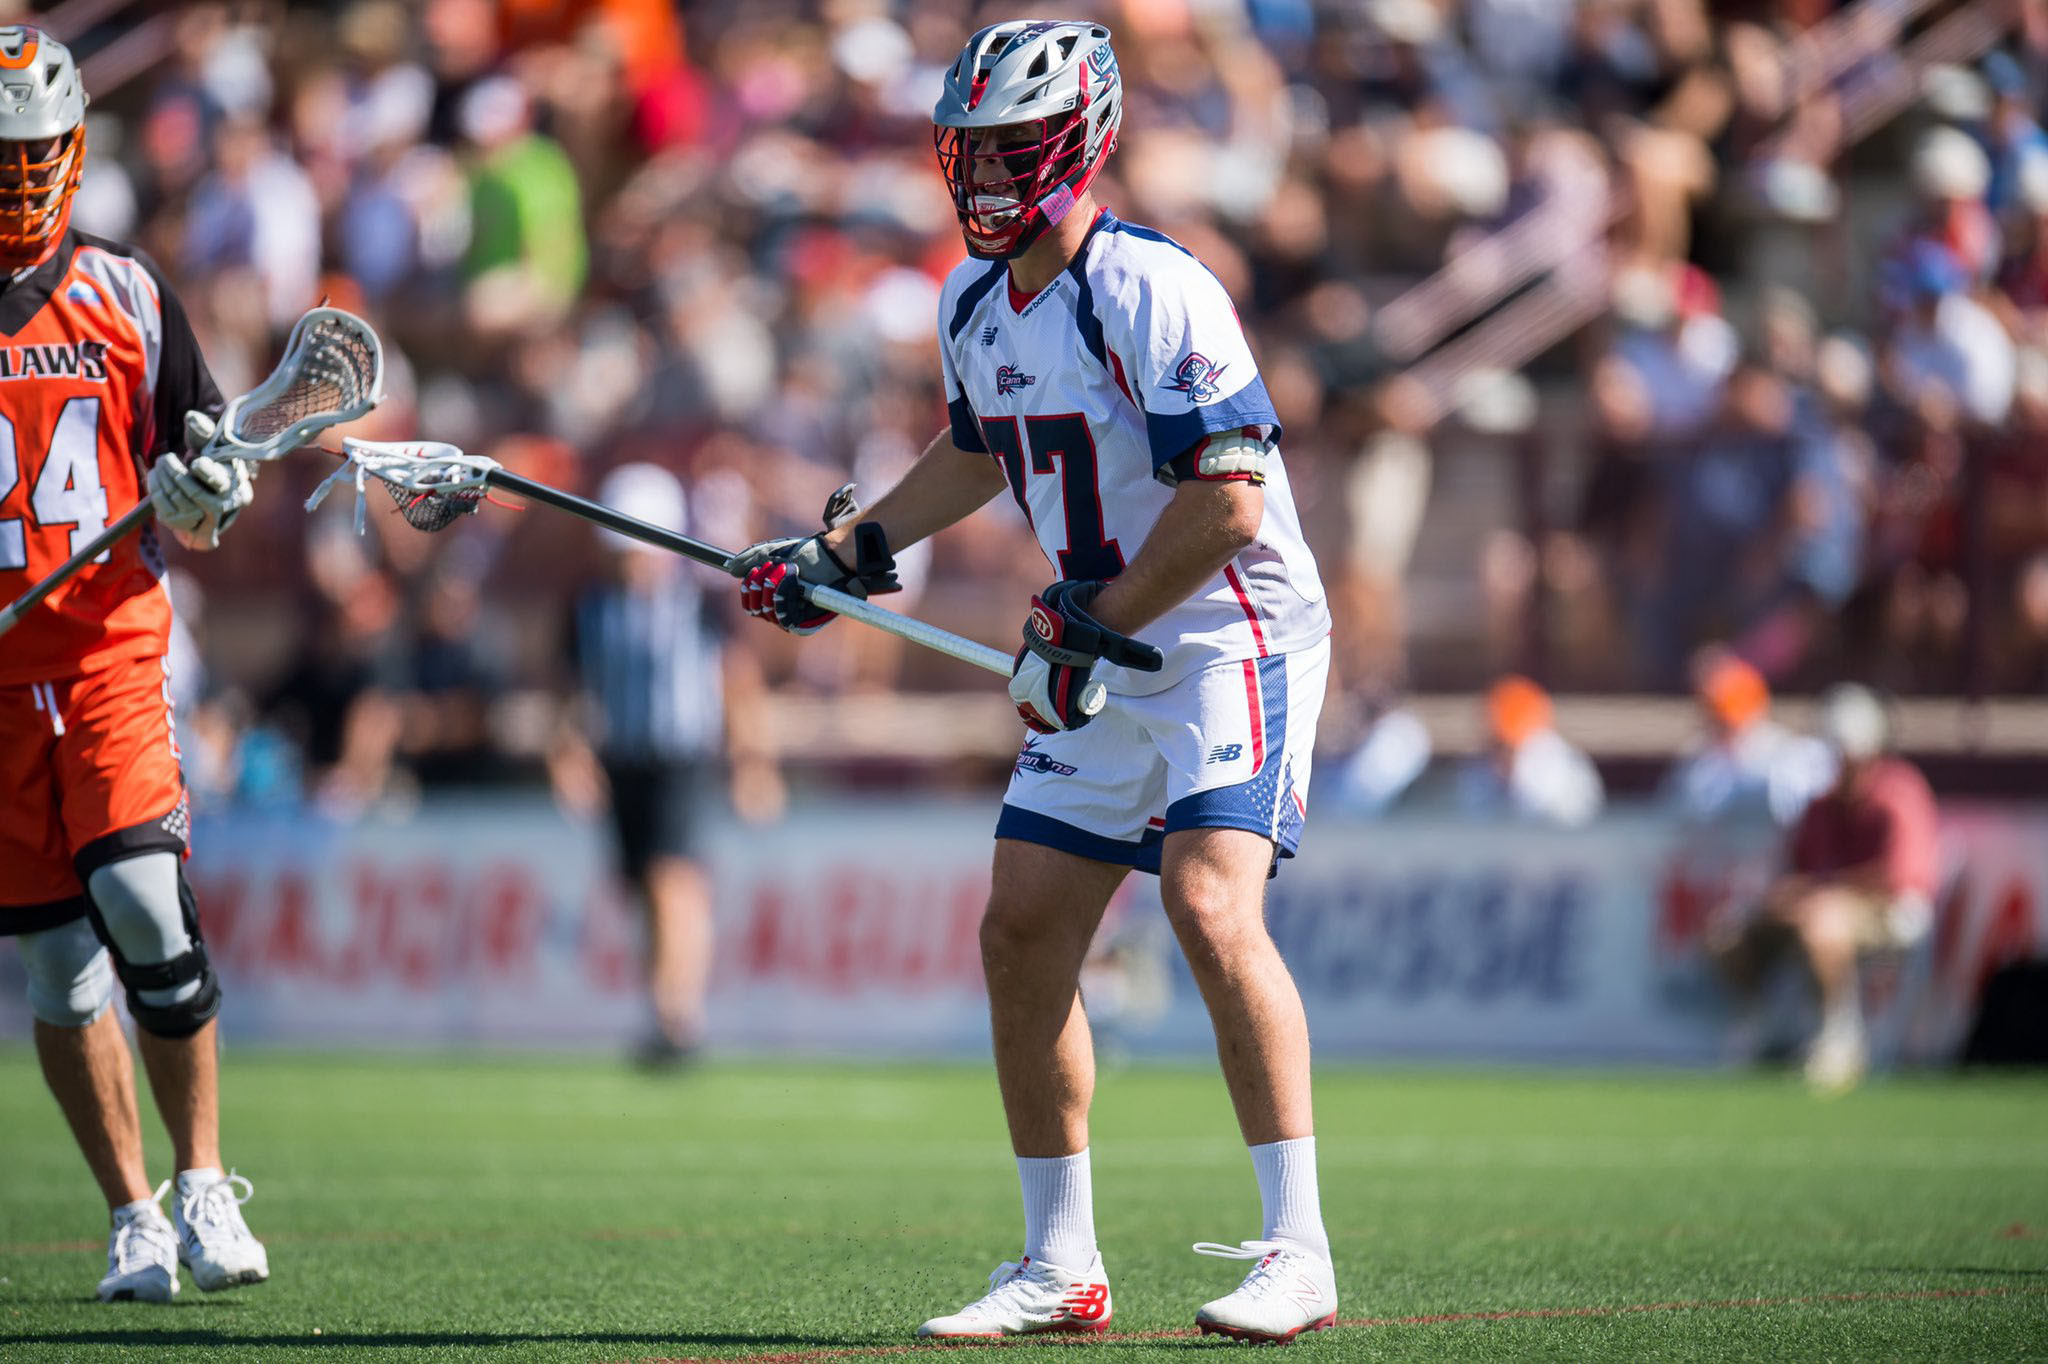 Eastport-South Manor graduate and Stony Brook University alumnus Justin Pugal playing defense for the Boston Cannons of Major League Lacrosse.  COURTESY JUSTING PUGAL